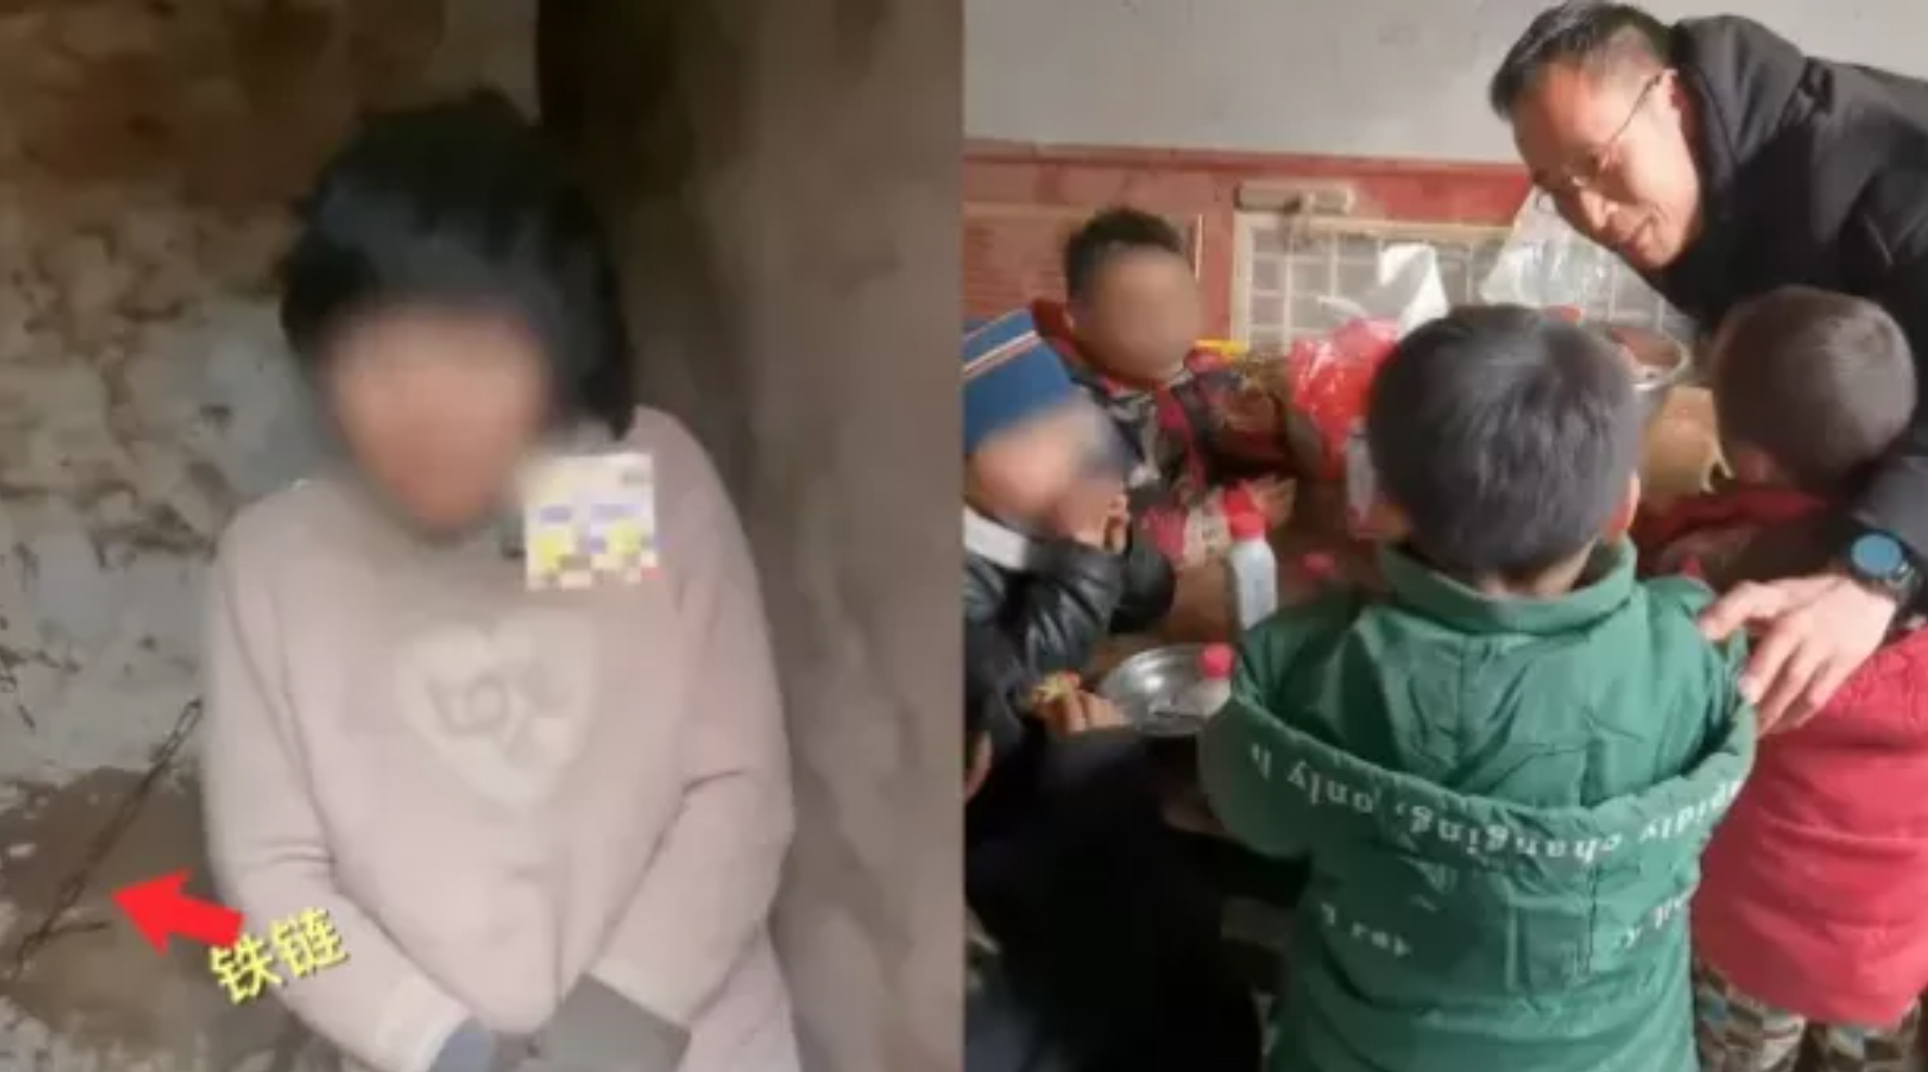 Disturbing video of chained-up mother in rural China sparks outrage, calls for investigation